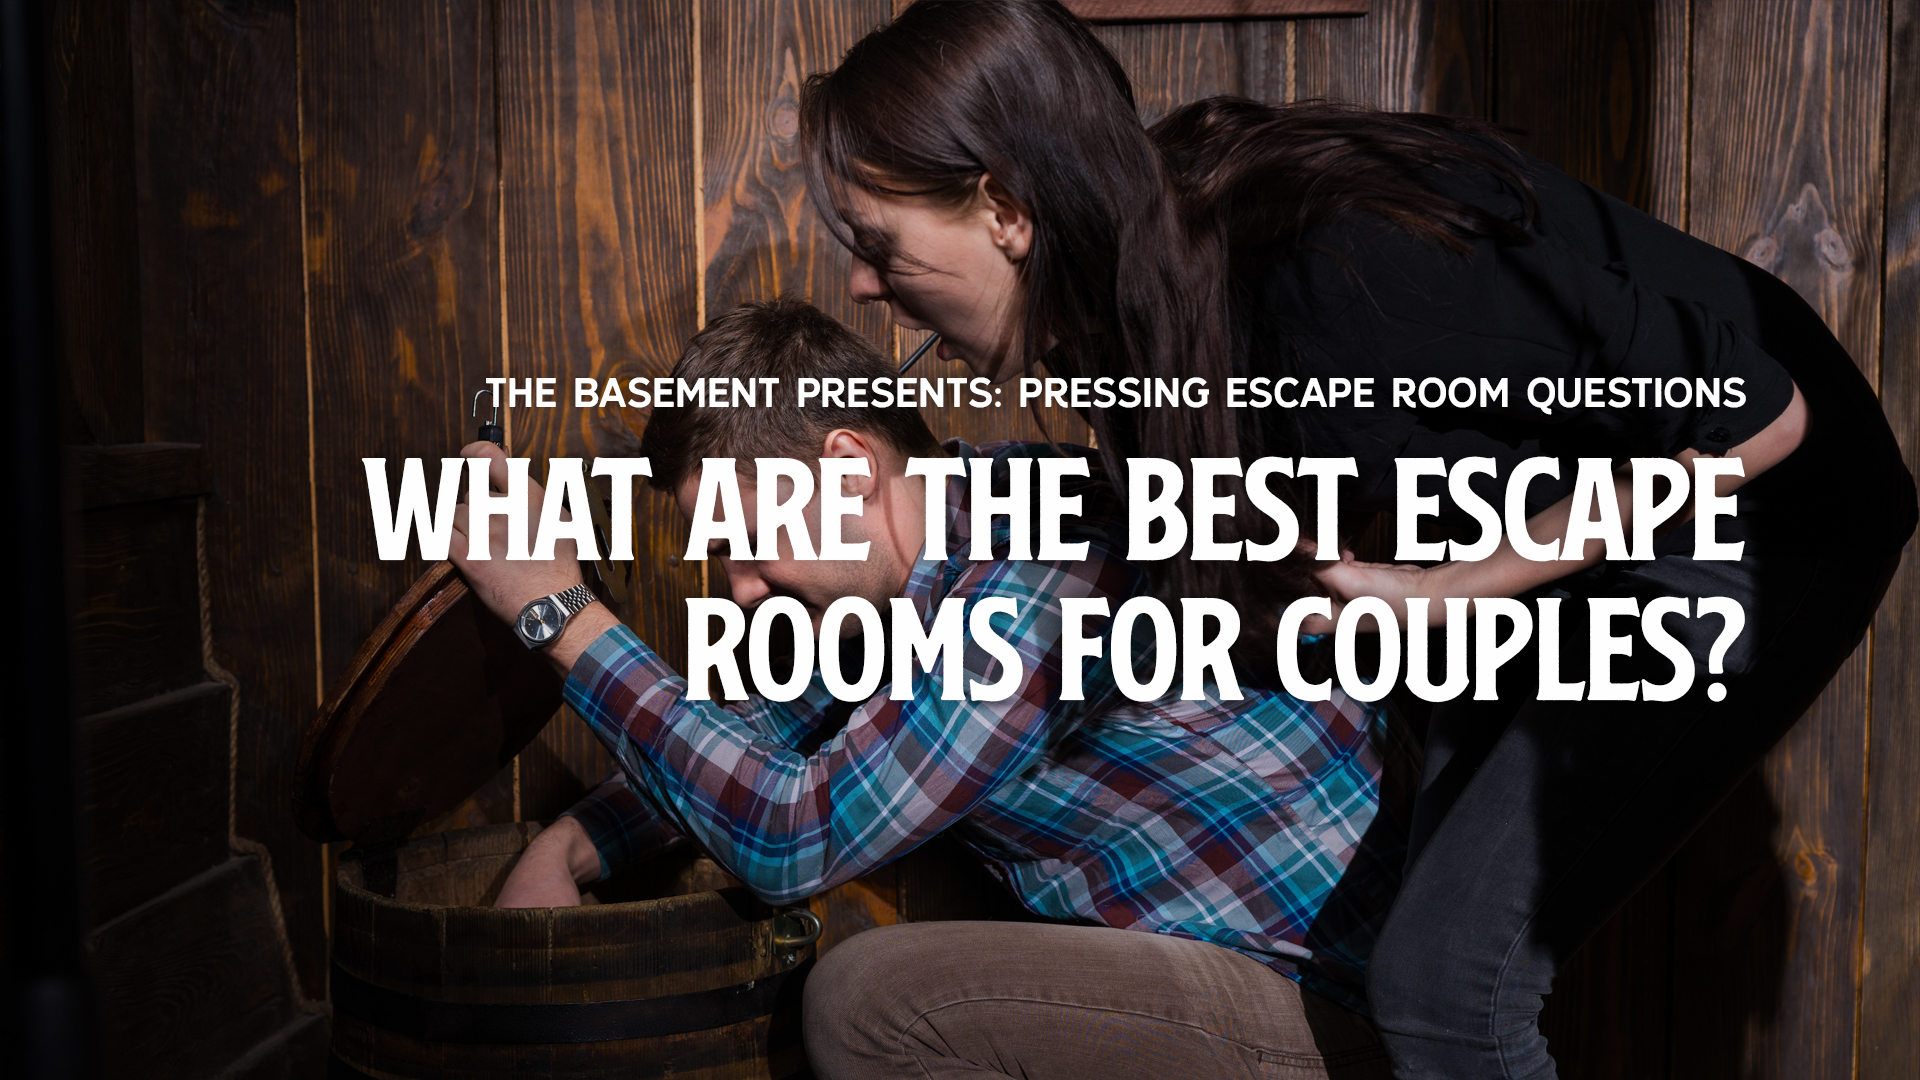 WHAT ARE THE BEST ESCAPE ROOMS FOR COUPLES?